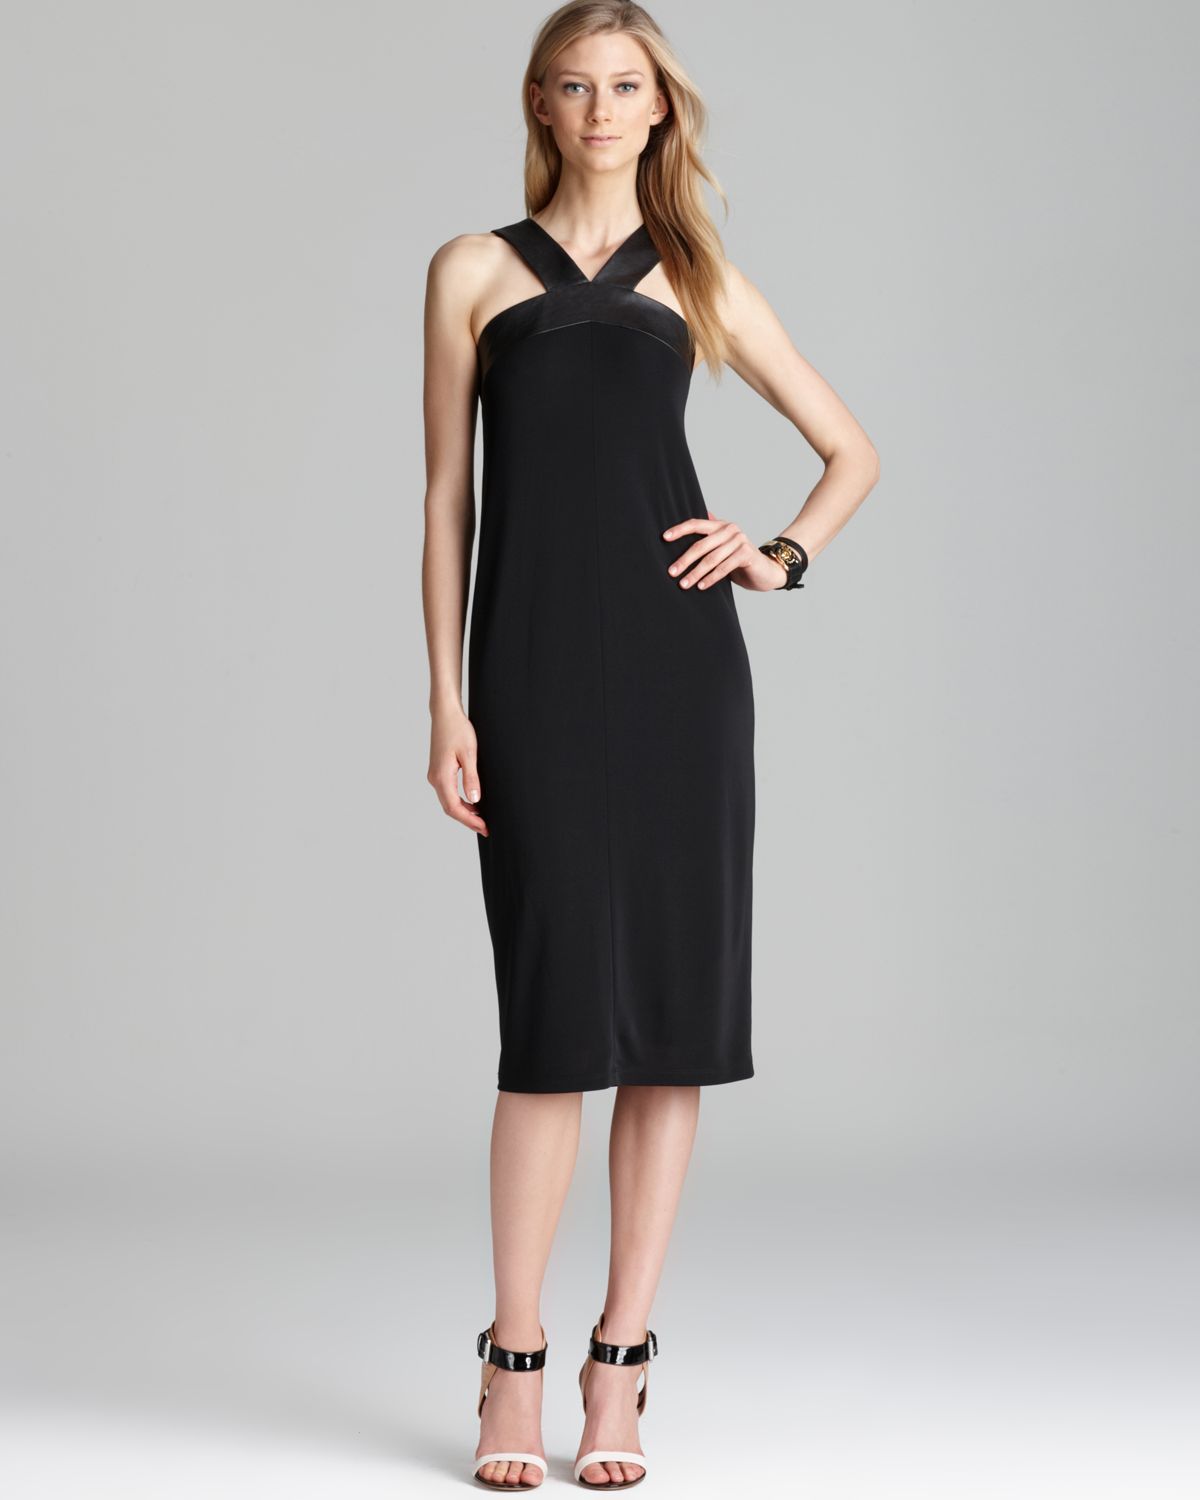 Lyst - Dkny Halter Dress with Leather Trim in Black